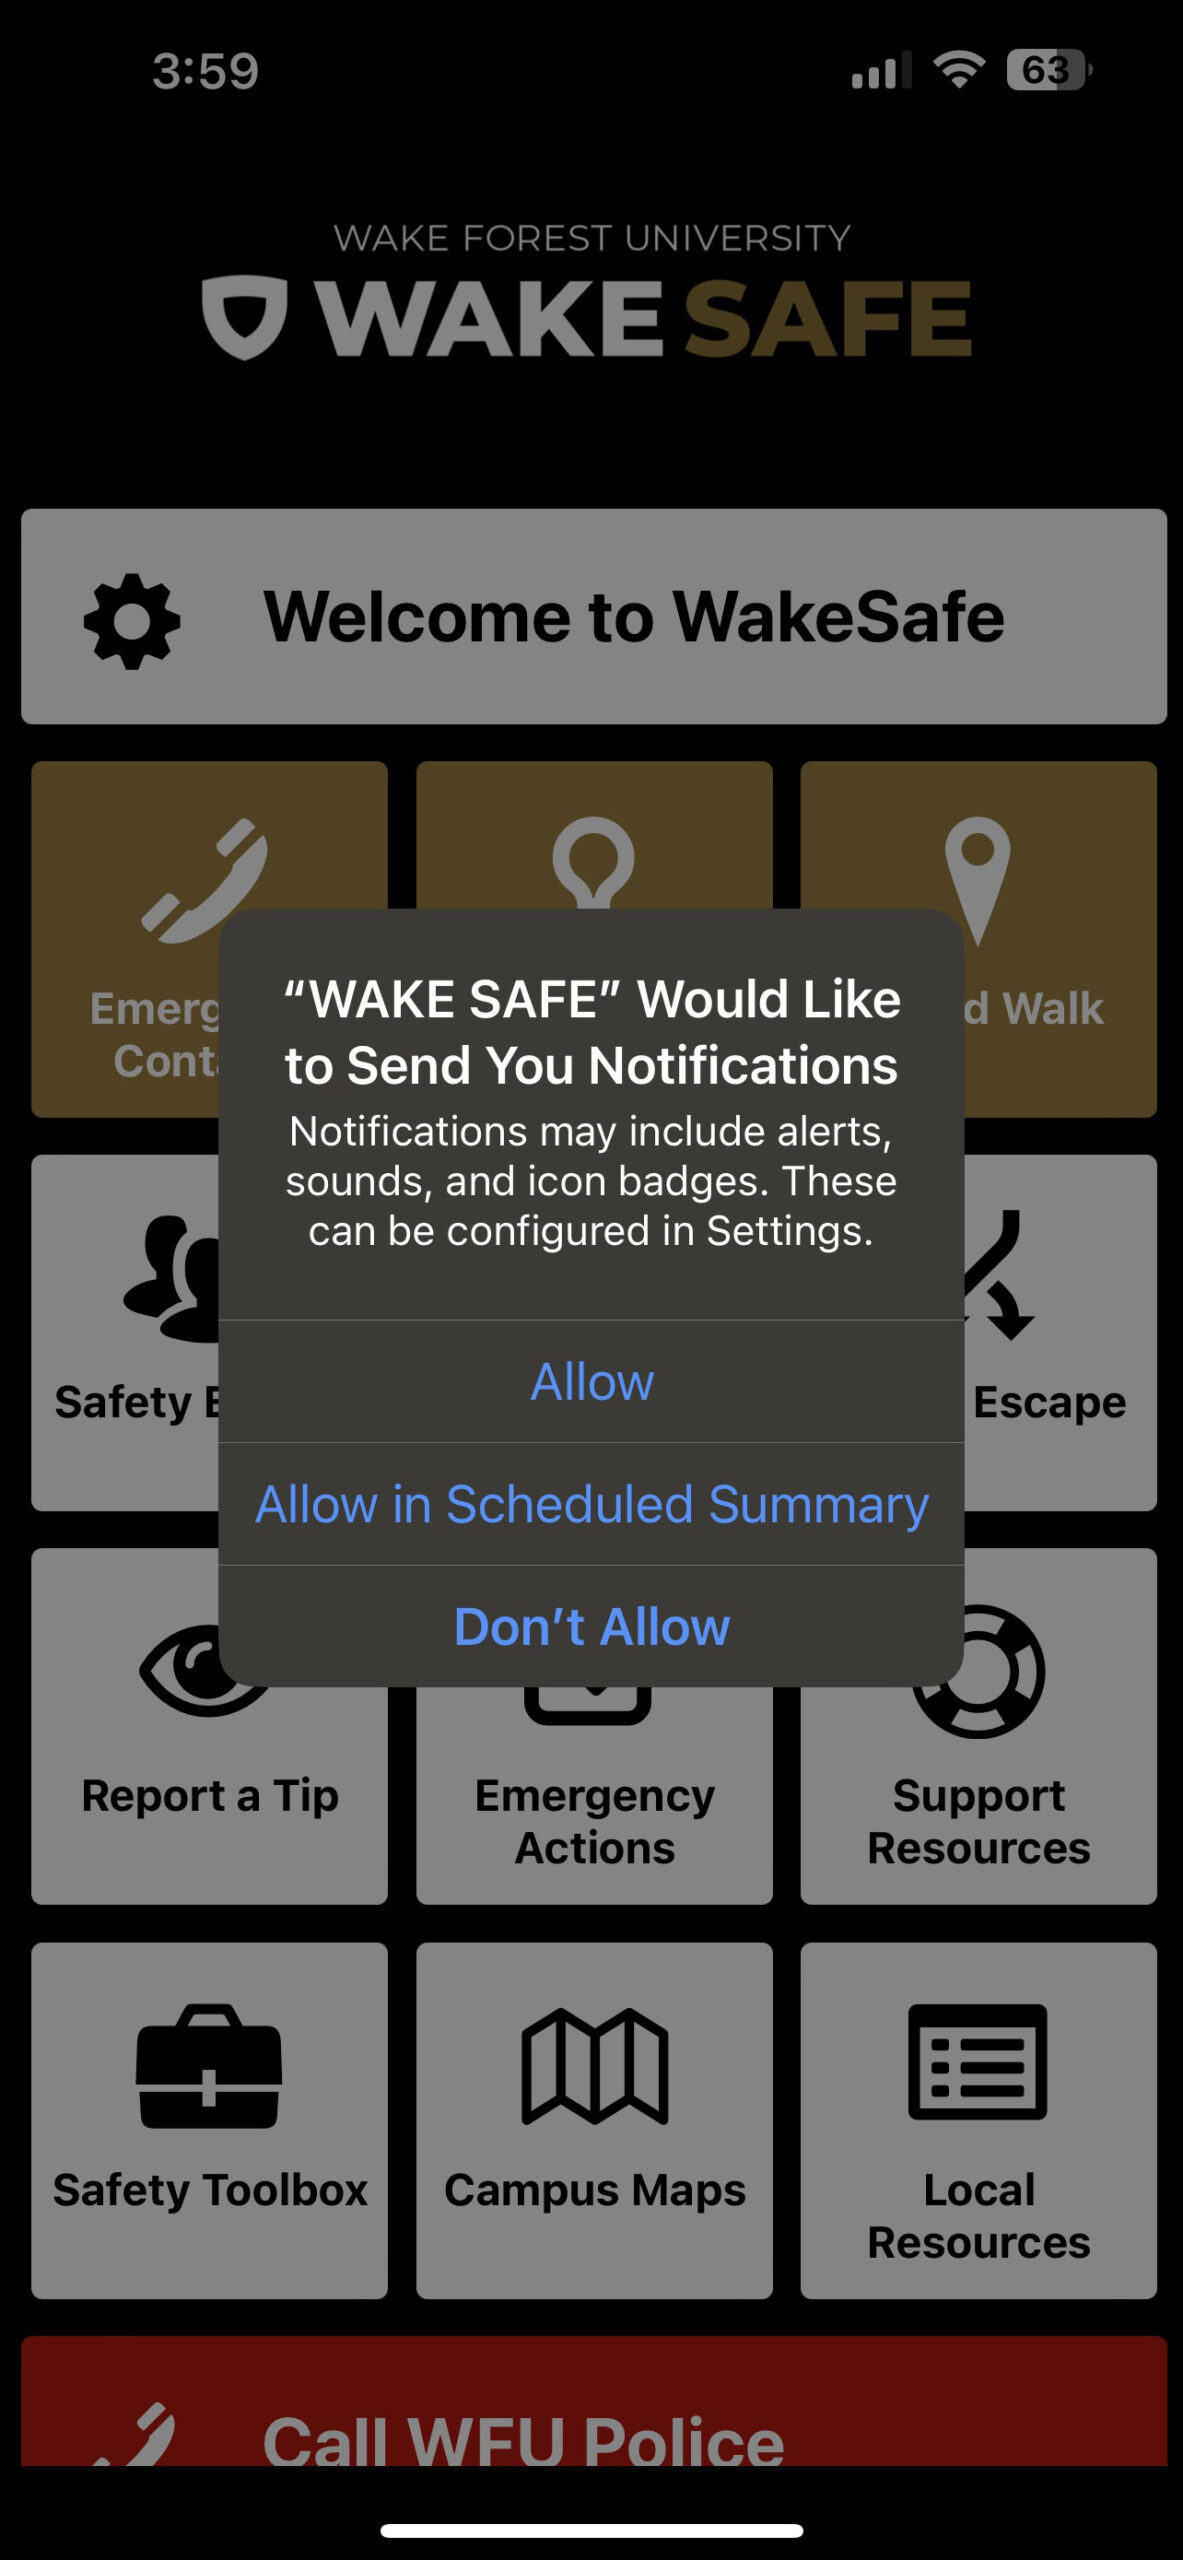 Wake Safe app showing screen on allowing sounds and notifications (say yes to this)